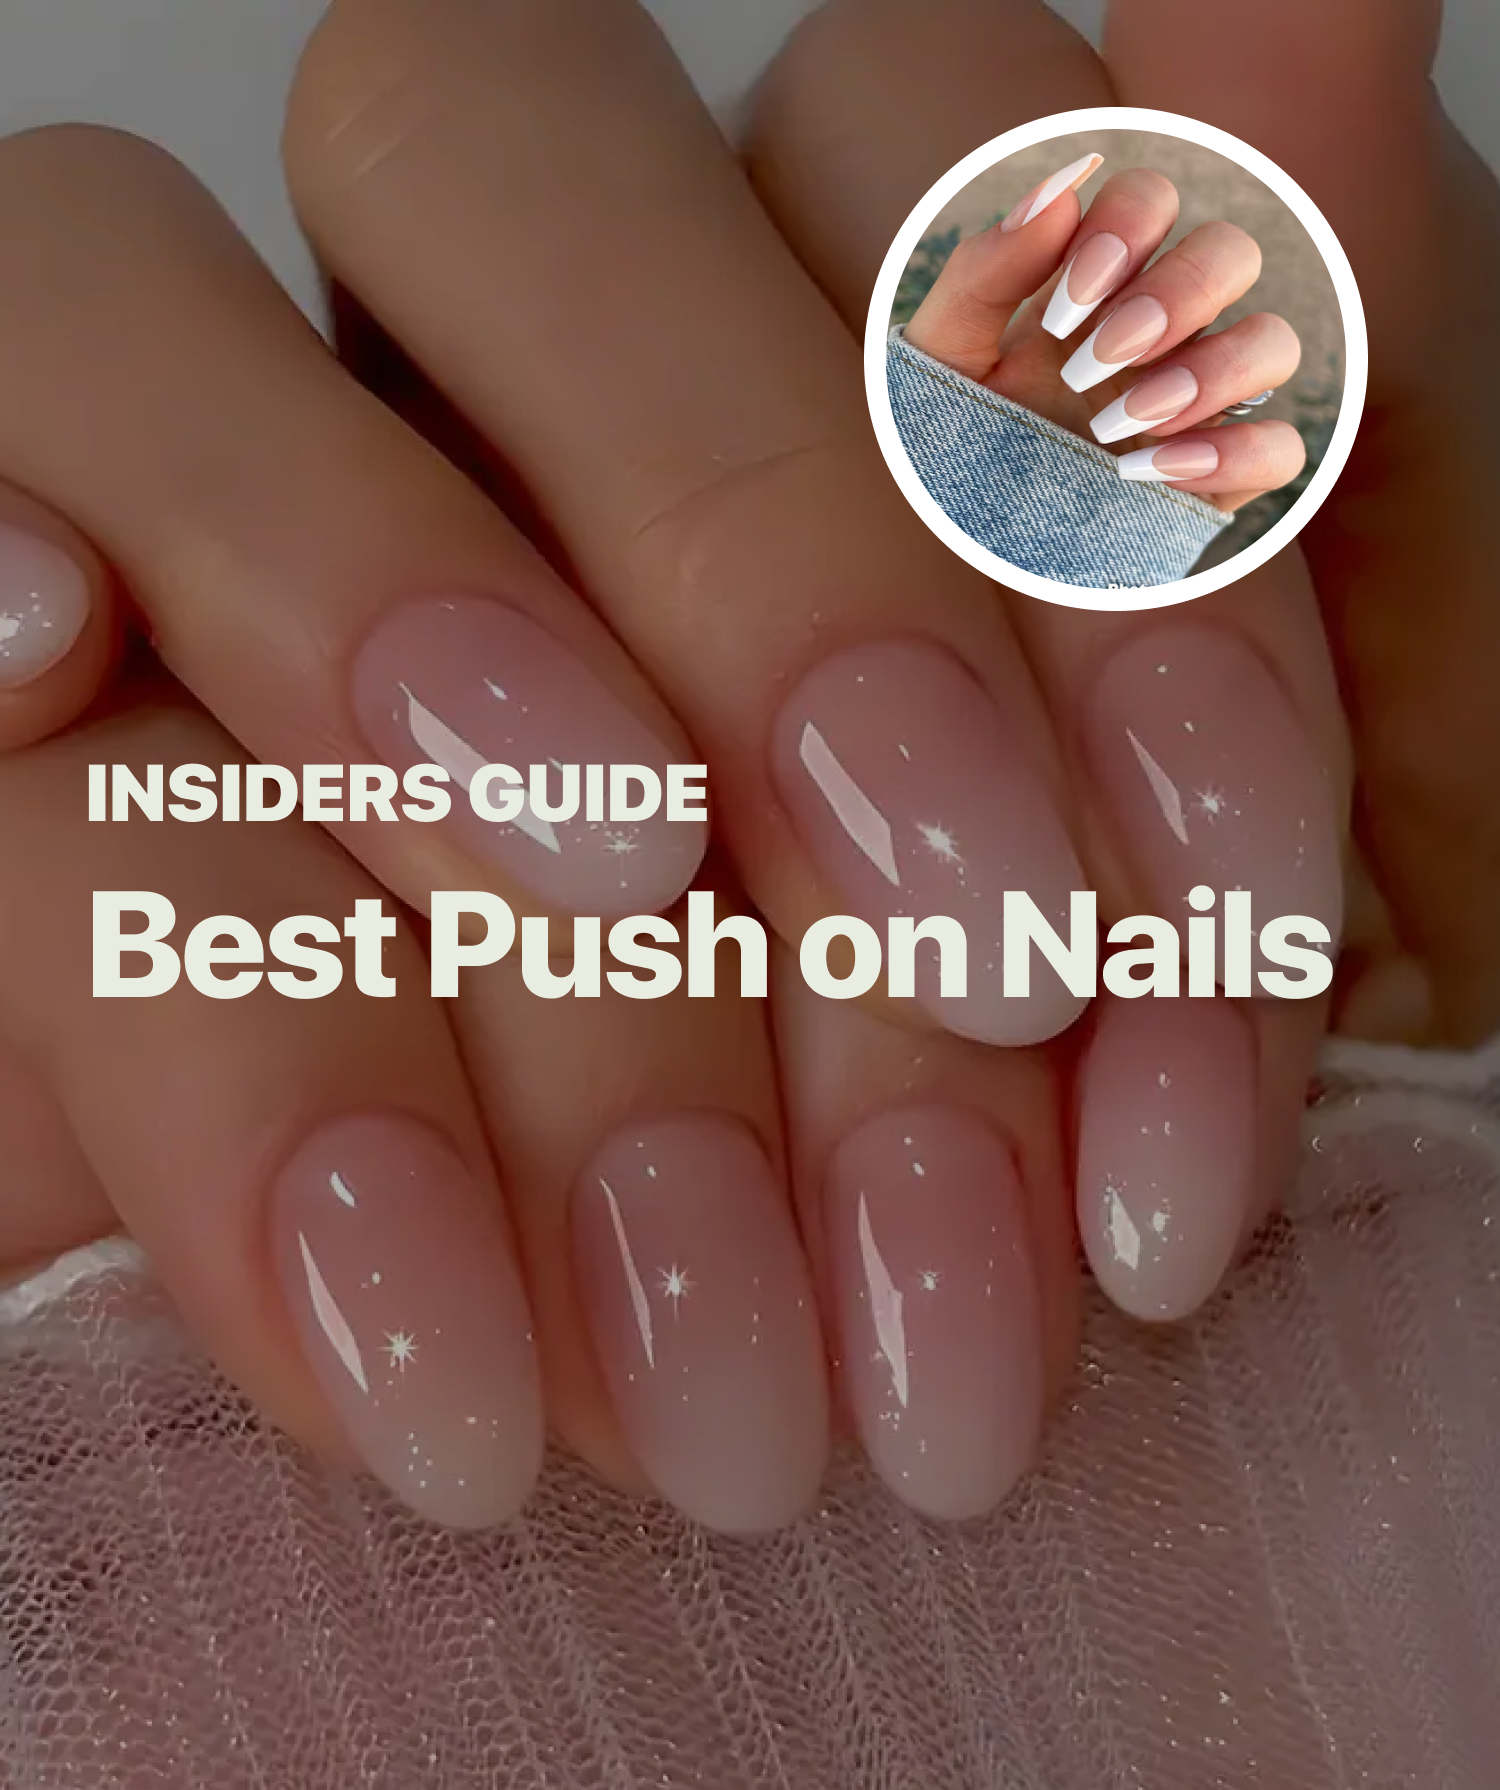 Best Press On Nails: How To Guide & Expert Top Picks post image